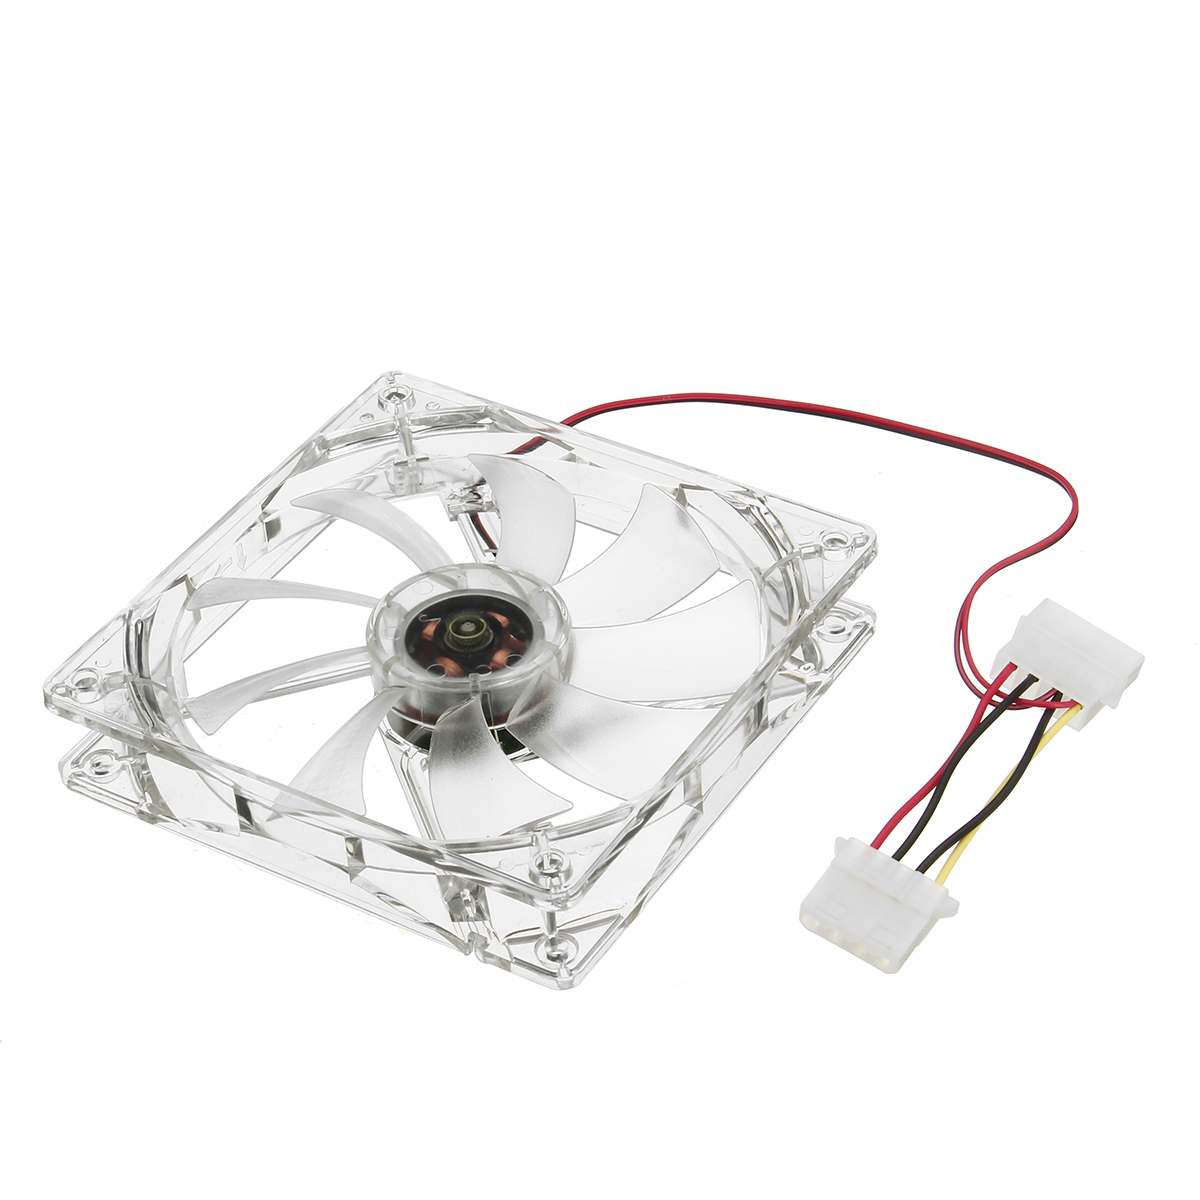 Find 12V DC 4Pin 4 LED Light 120x120x25mm 1100PRM PC Computer Case CPU Cooling Fan for Sale on Gipsybee.com with cryptocurrencies